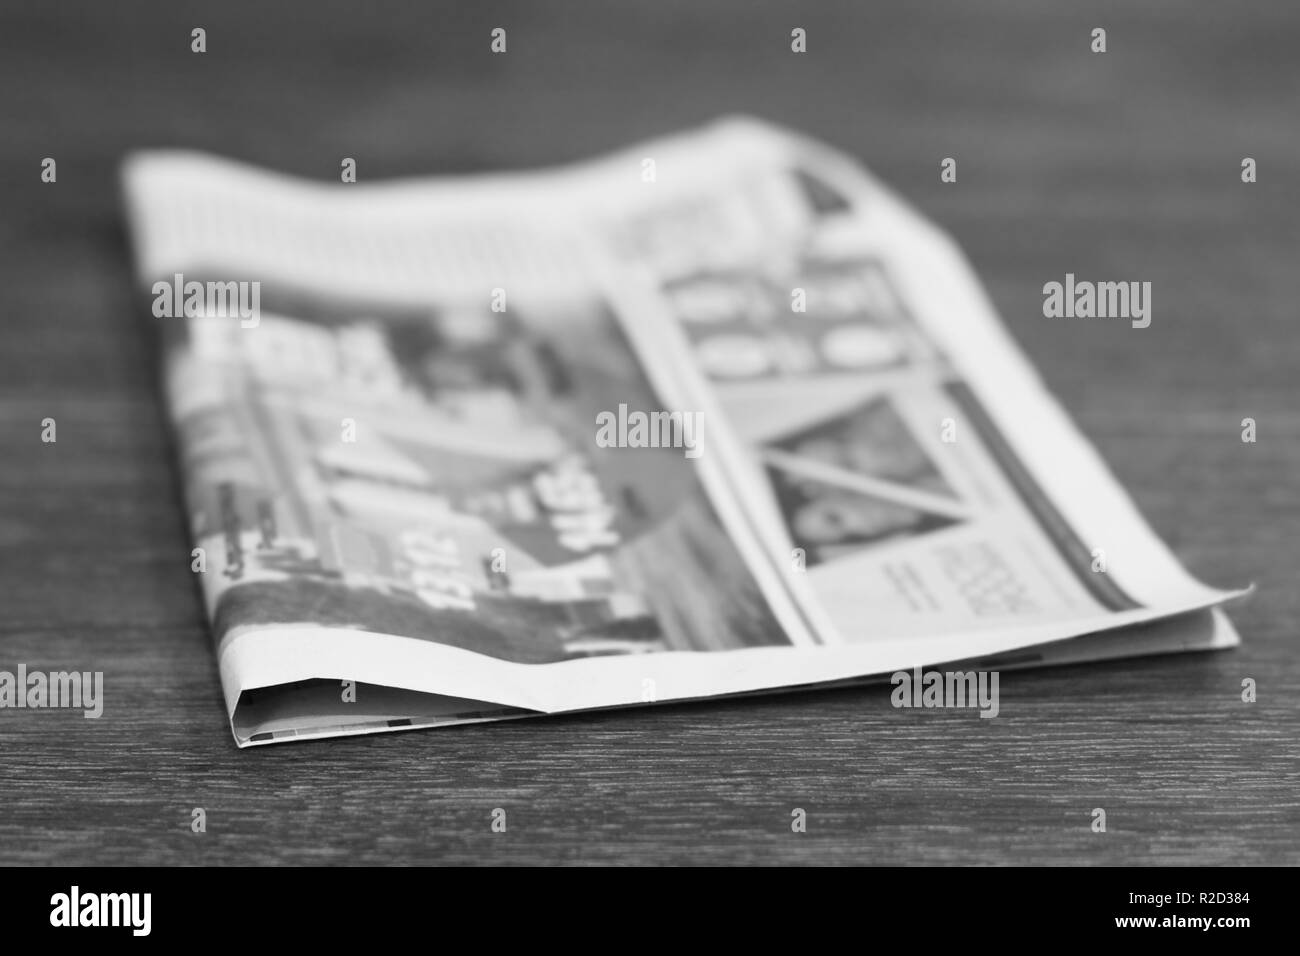 Single newspaper on wooden table, side view Stock Photo